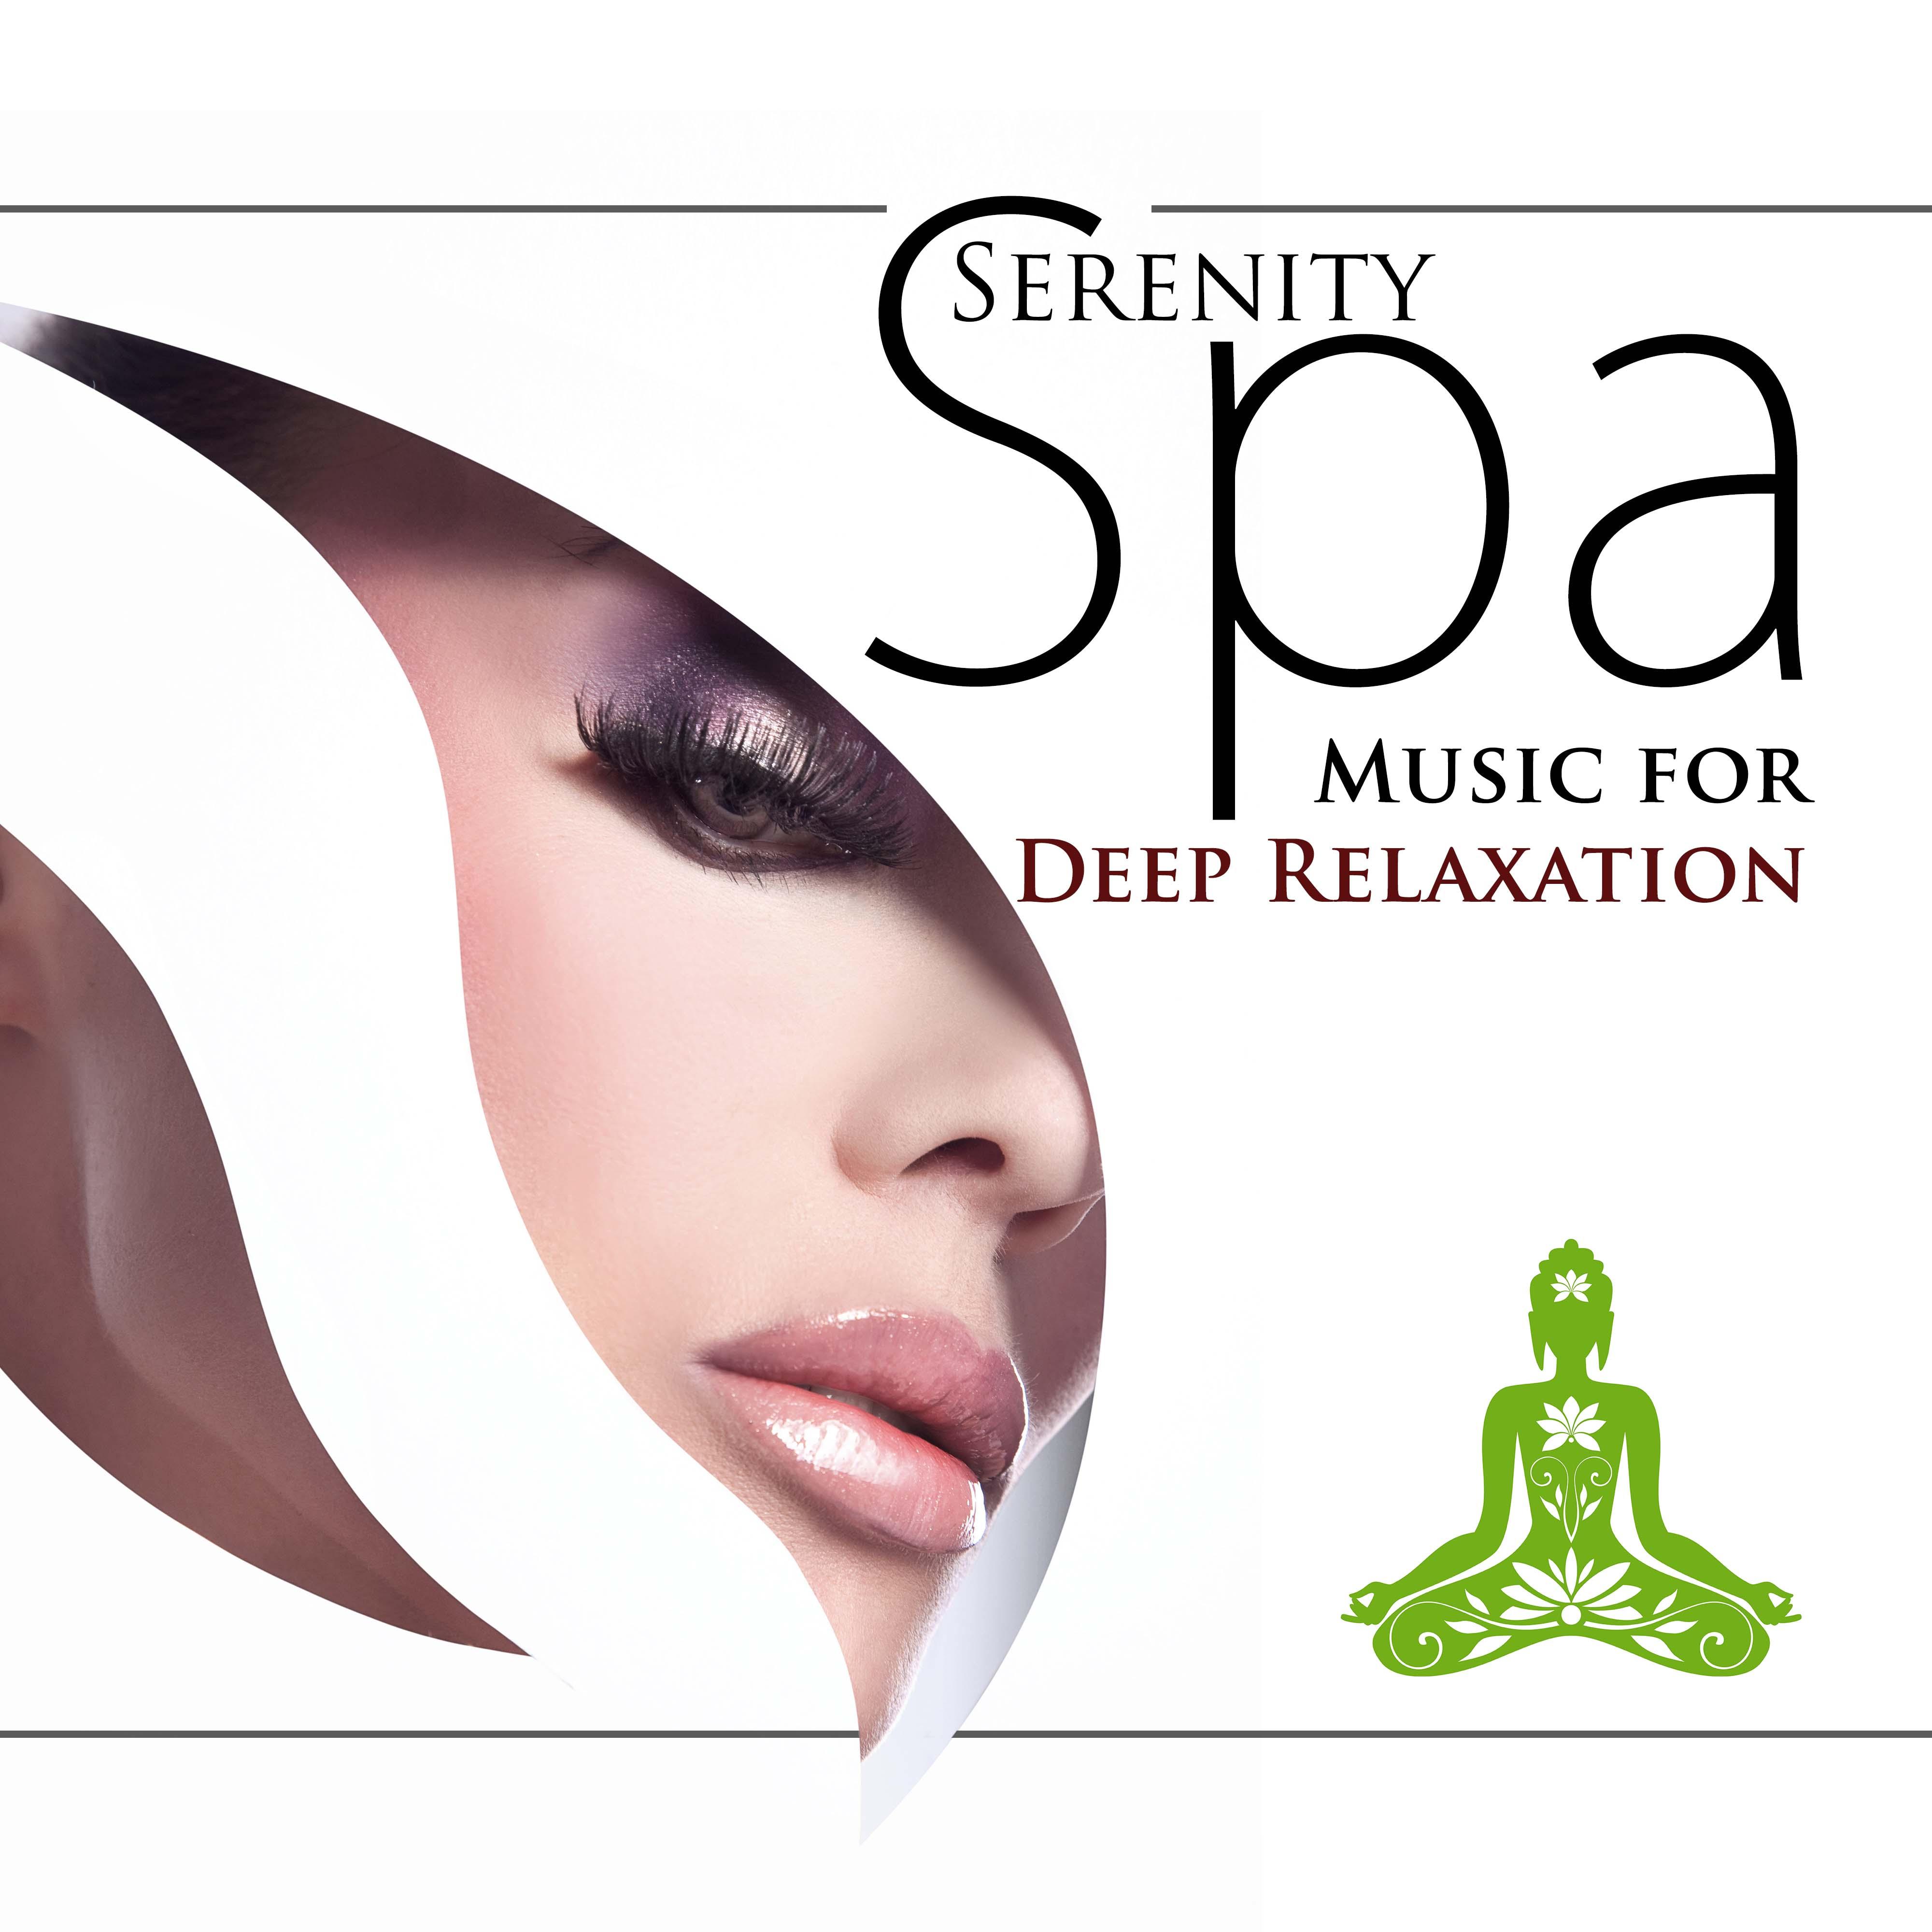 Serenity Spa - Music for Deep Relaxation